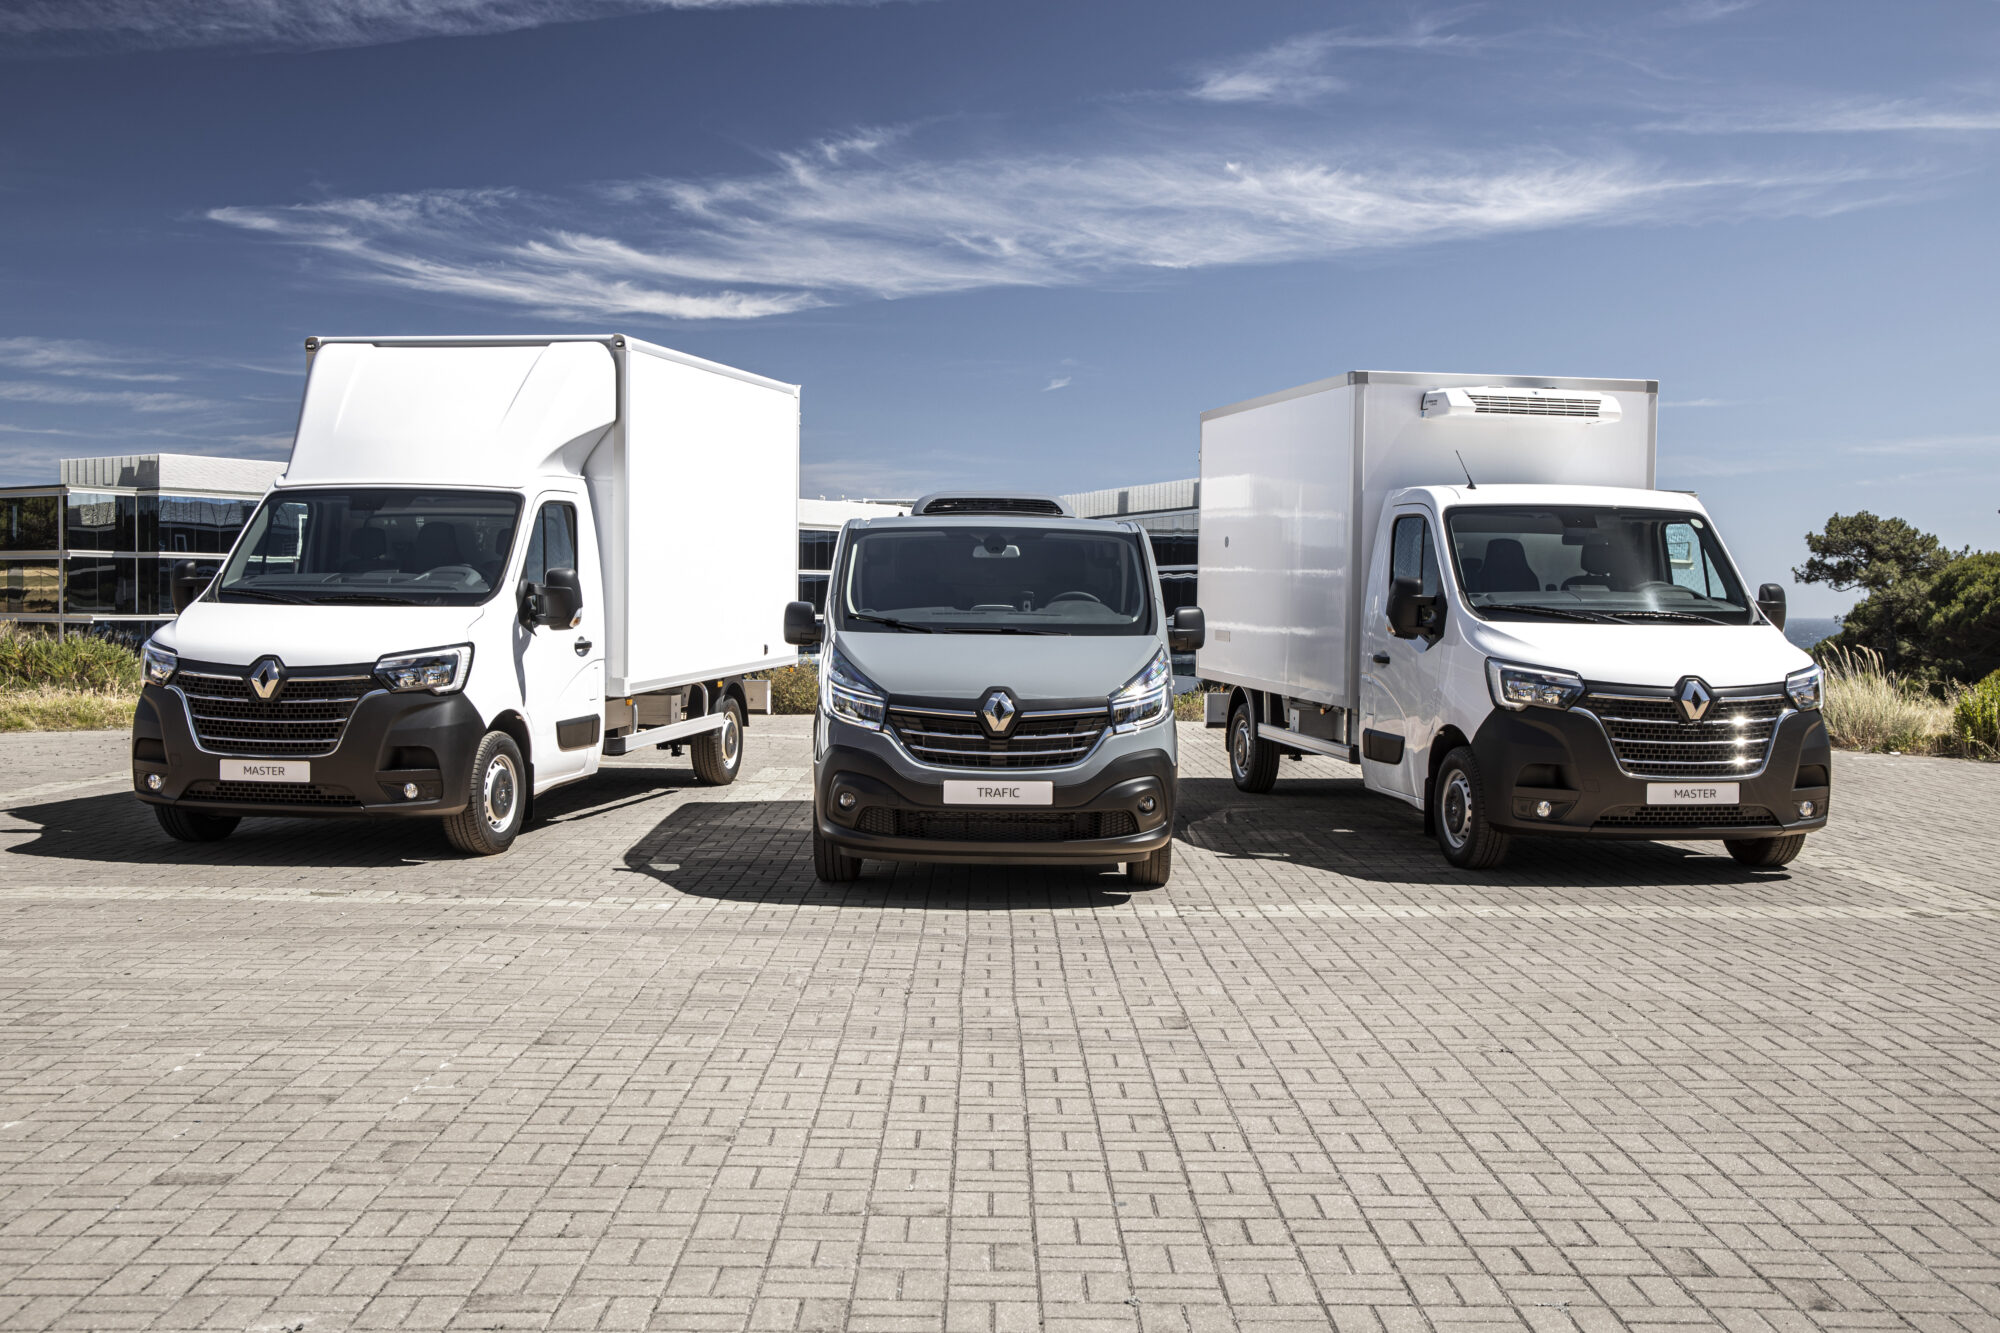 2019 - New Renault MASTER and New Renault TRAFIC